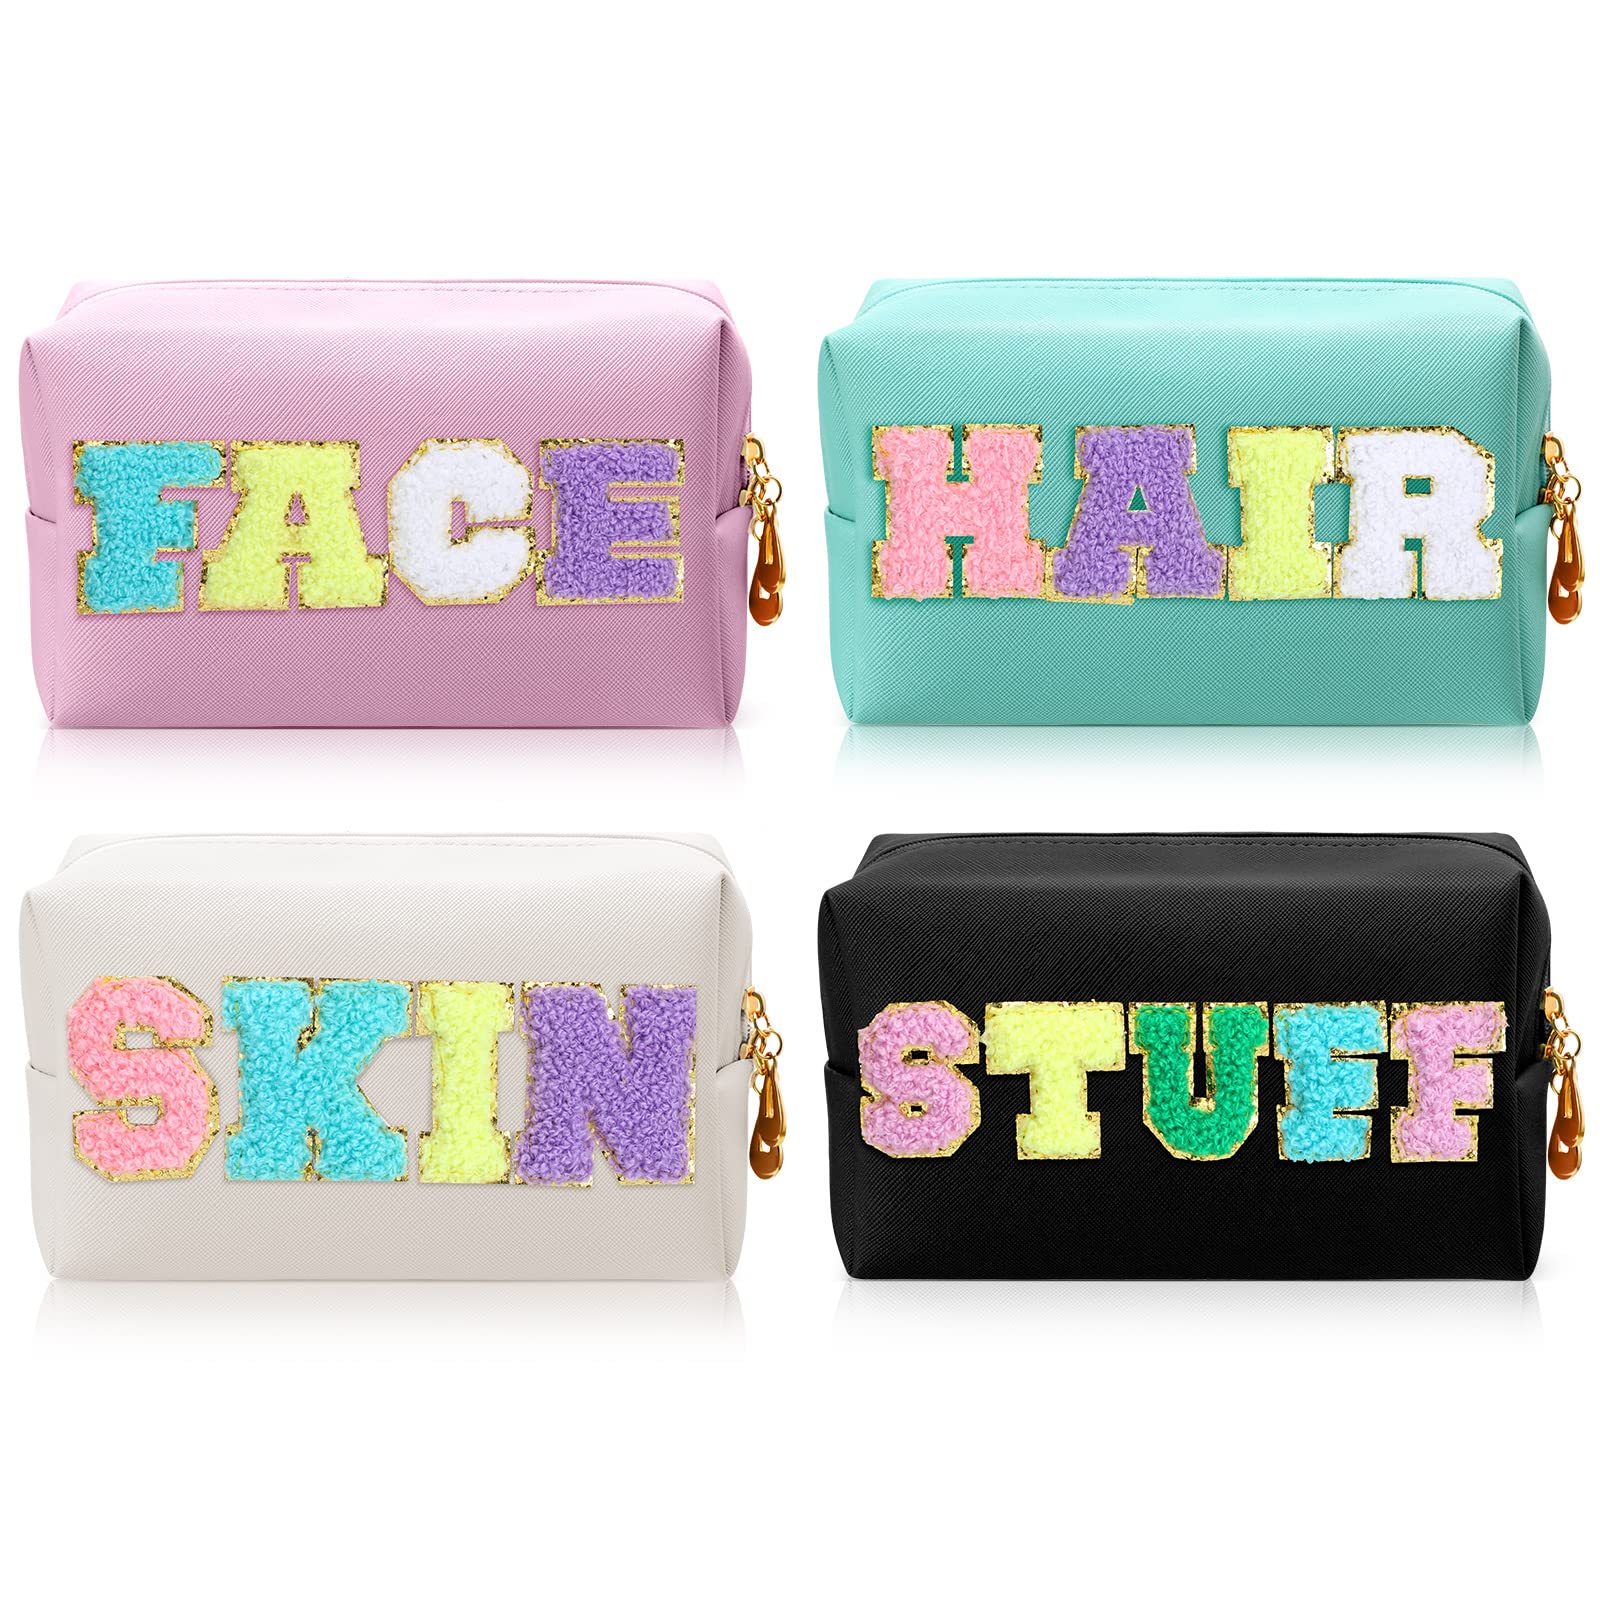 4 Pieces Preppy Patch Small Cosmetic Bag Preppy Makeup Bag PU Leather Portable Waterproof Makeup Organizer Bag Preppy Pouch Makeup Accessories (Face)